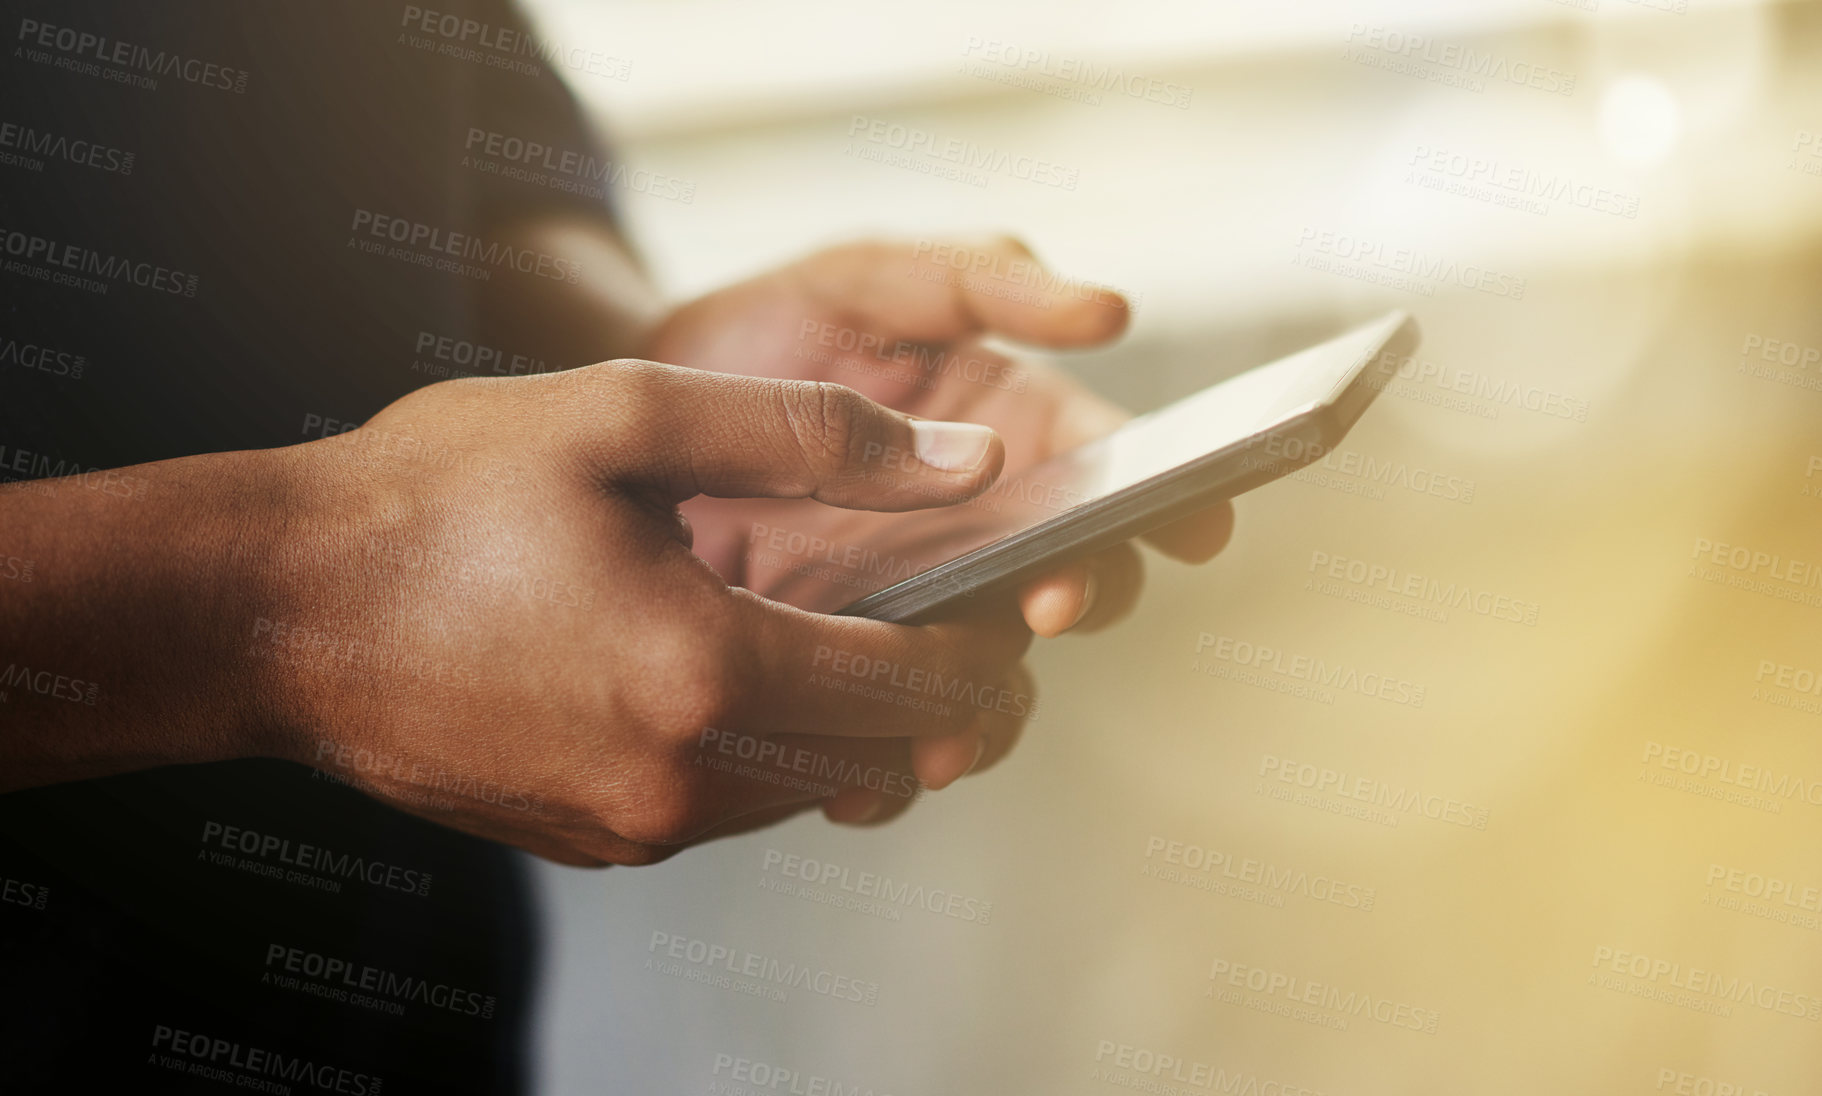 Buy stock photo Cropped shot of a man using a smartphone